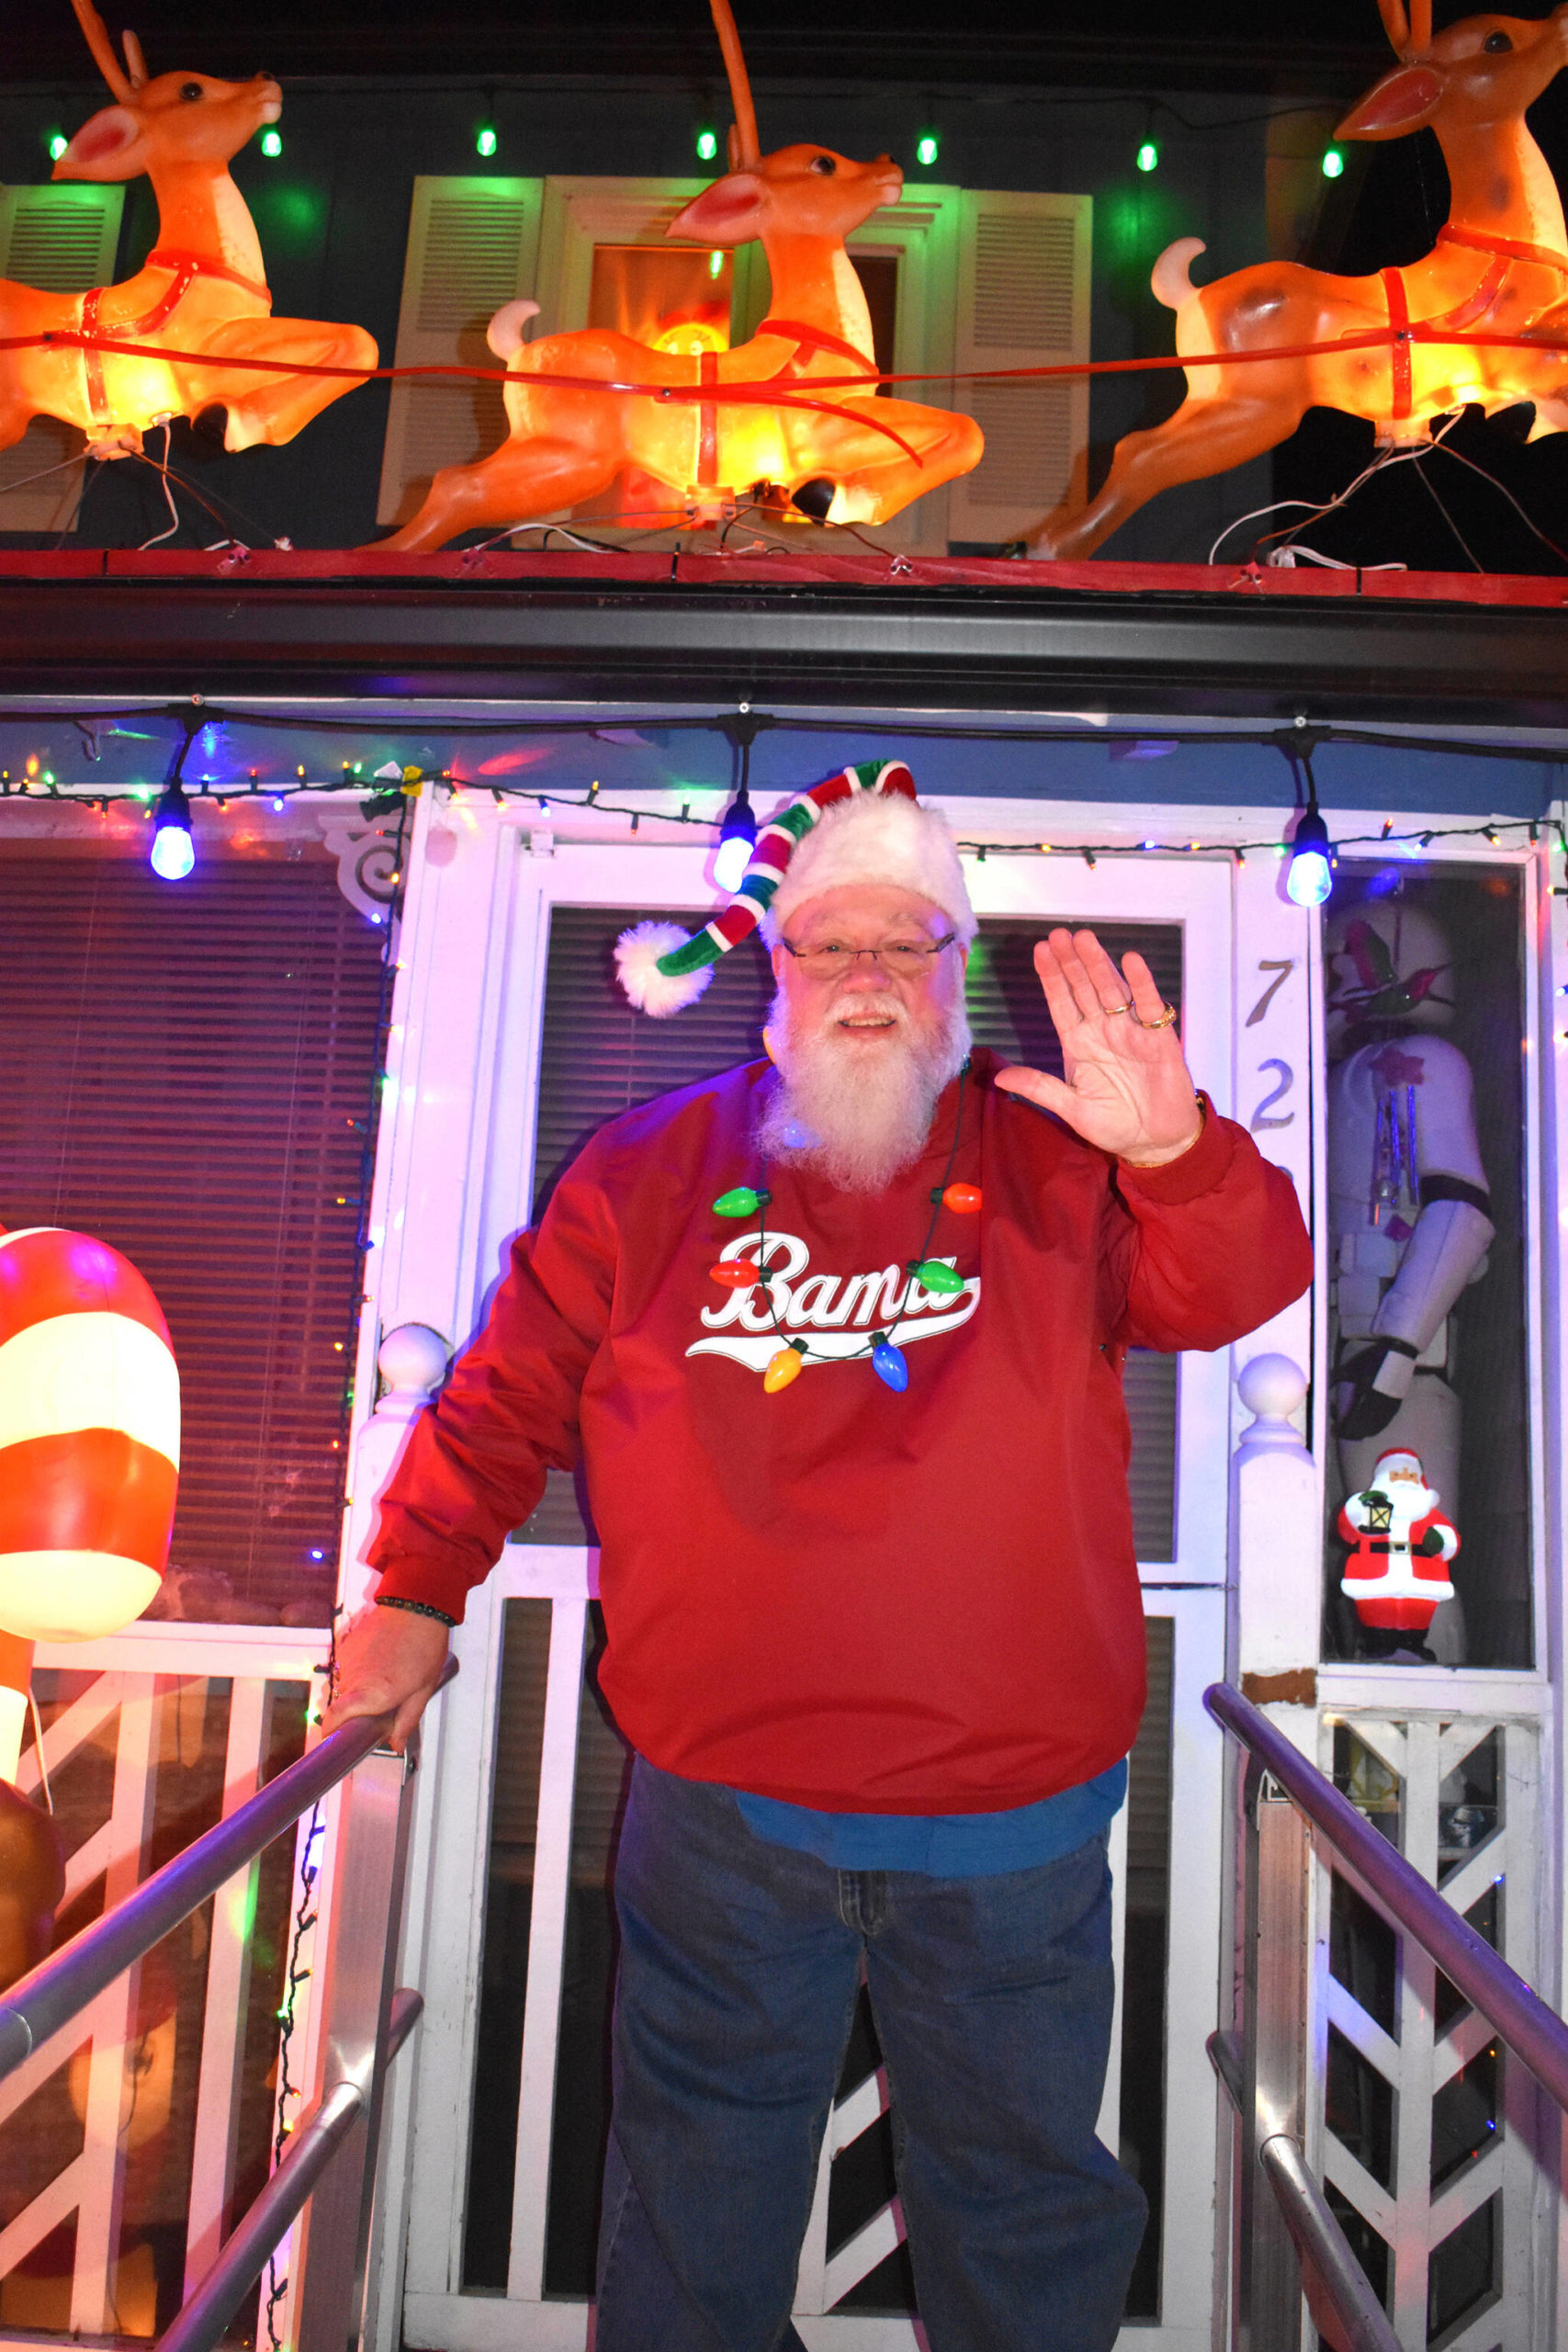 Kevin Farley, who won the Montesano’s Chamber of Commerce’s “Griswold Winner” award this year, gives a friendly wave. Farley finished his second year of decorating his yard and the exterior of his home — which sits at the corner of West McBryde Avenue and North 1st Street. Farley loves to decorate during the holidays and his favorite thing is seeing his neighbors’ smiles when they see his hard work.